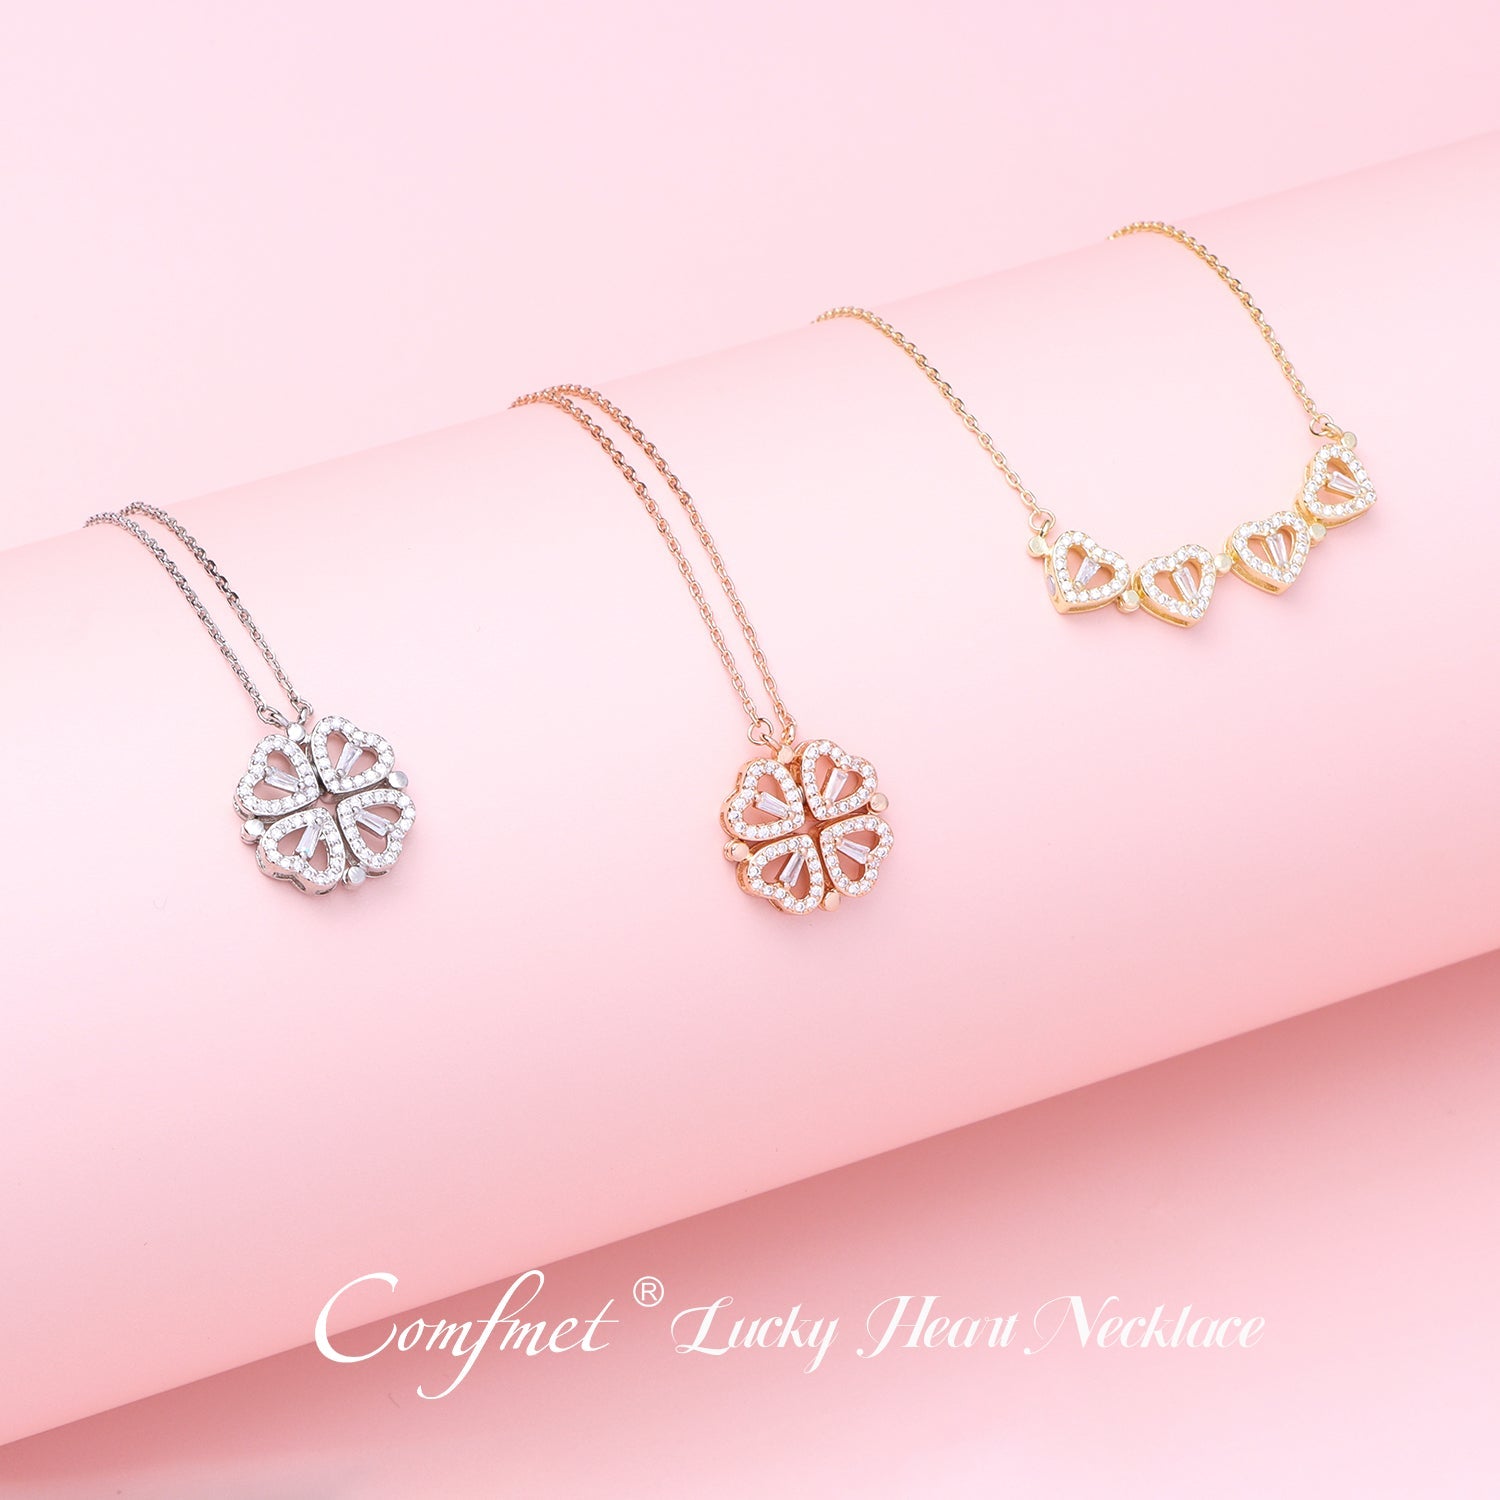 lucky heart necklace with six rosesumsjg